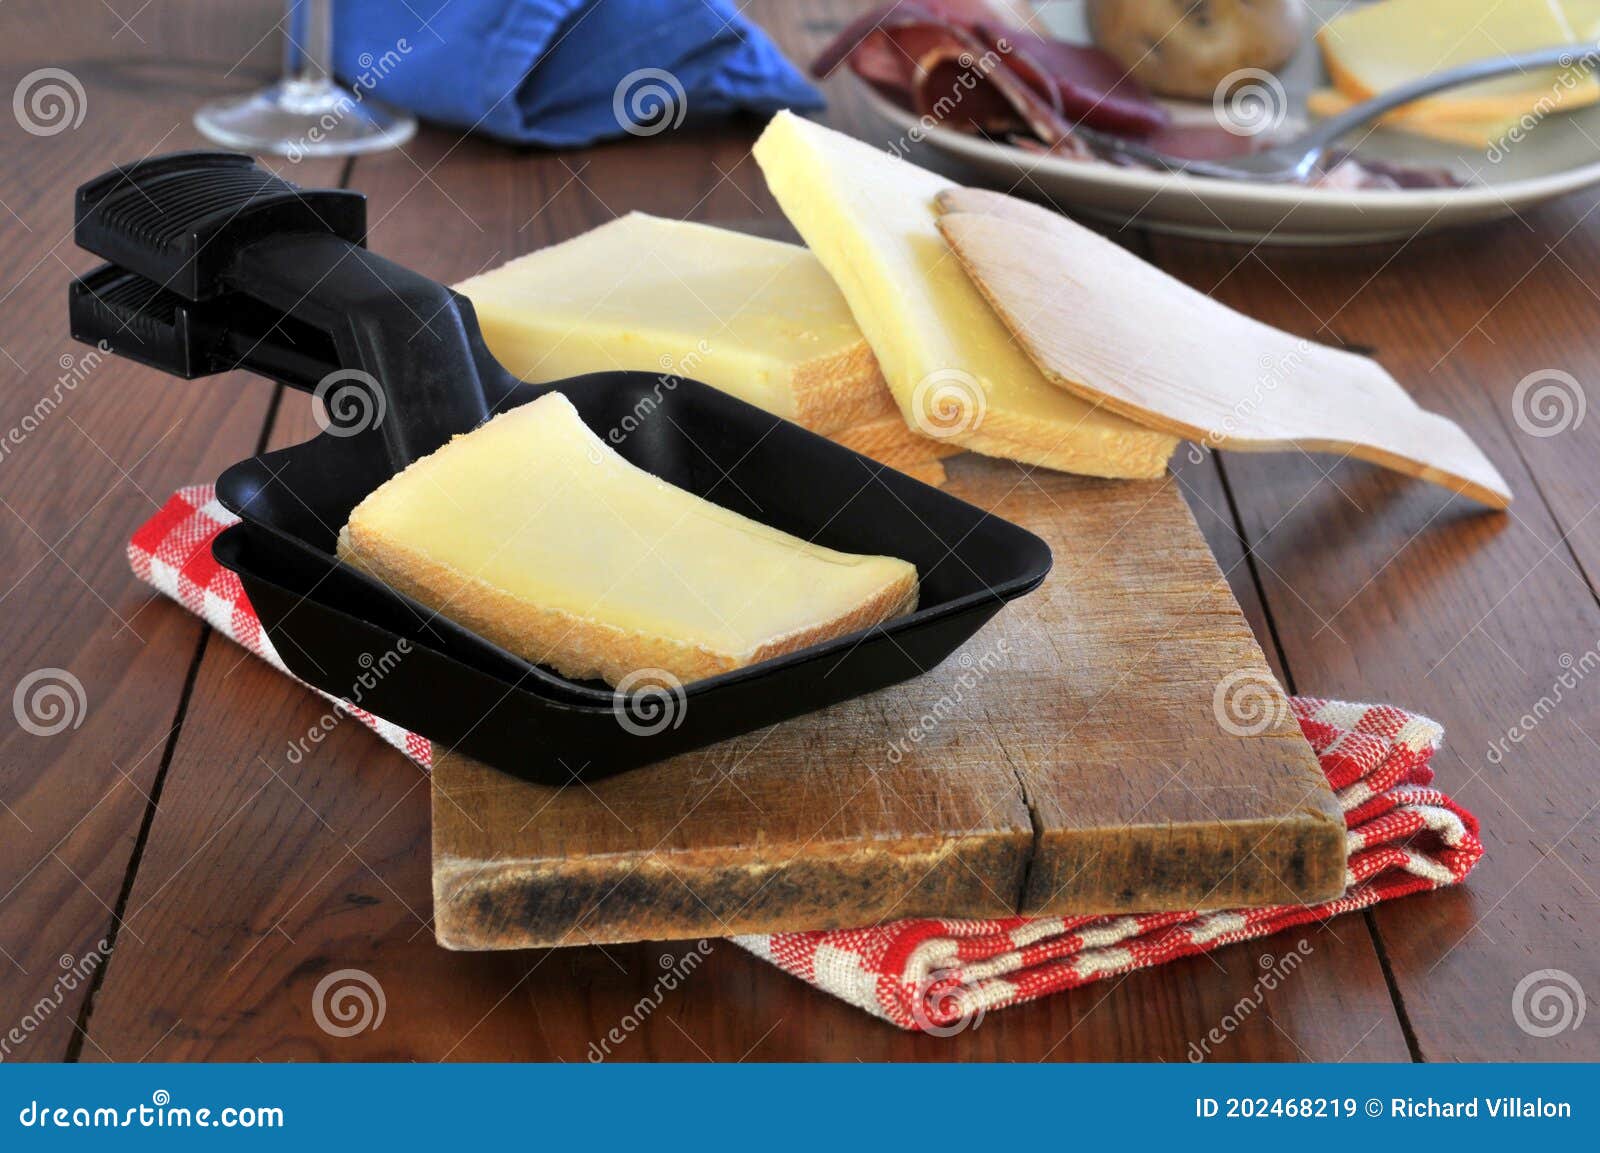 Queso Raclette - Formagge Quesos